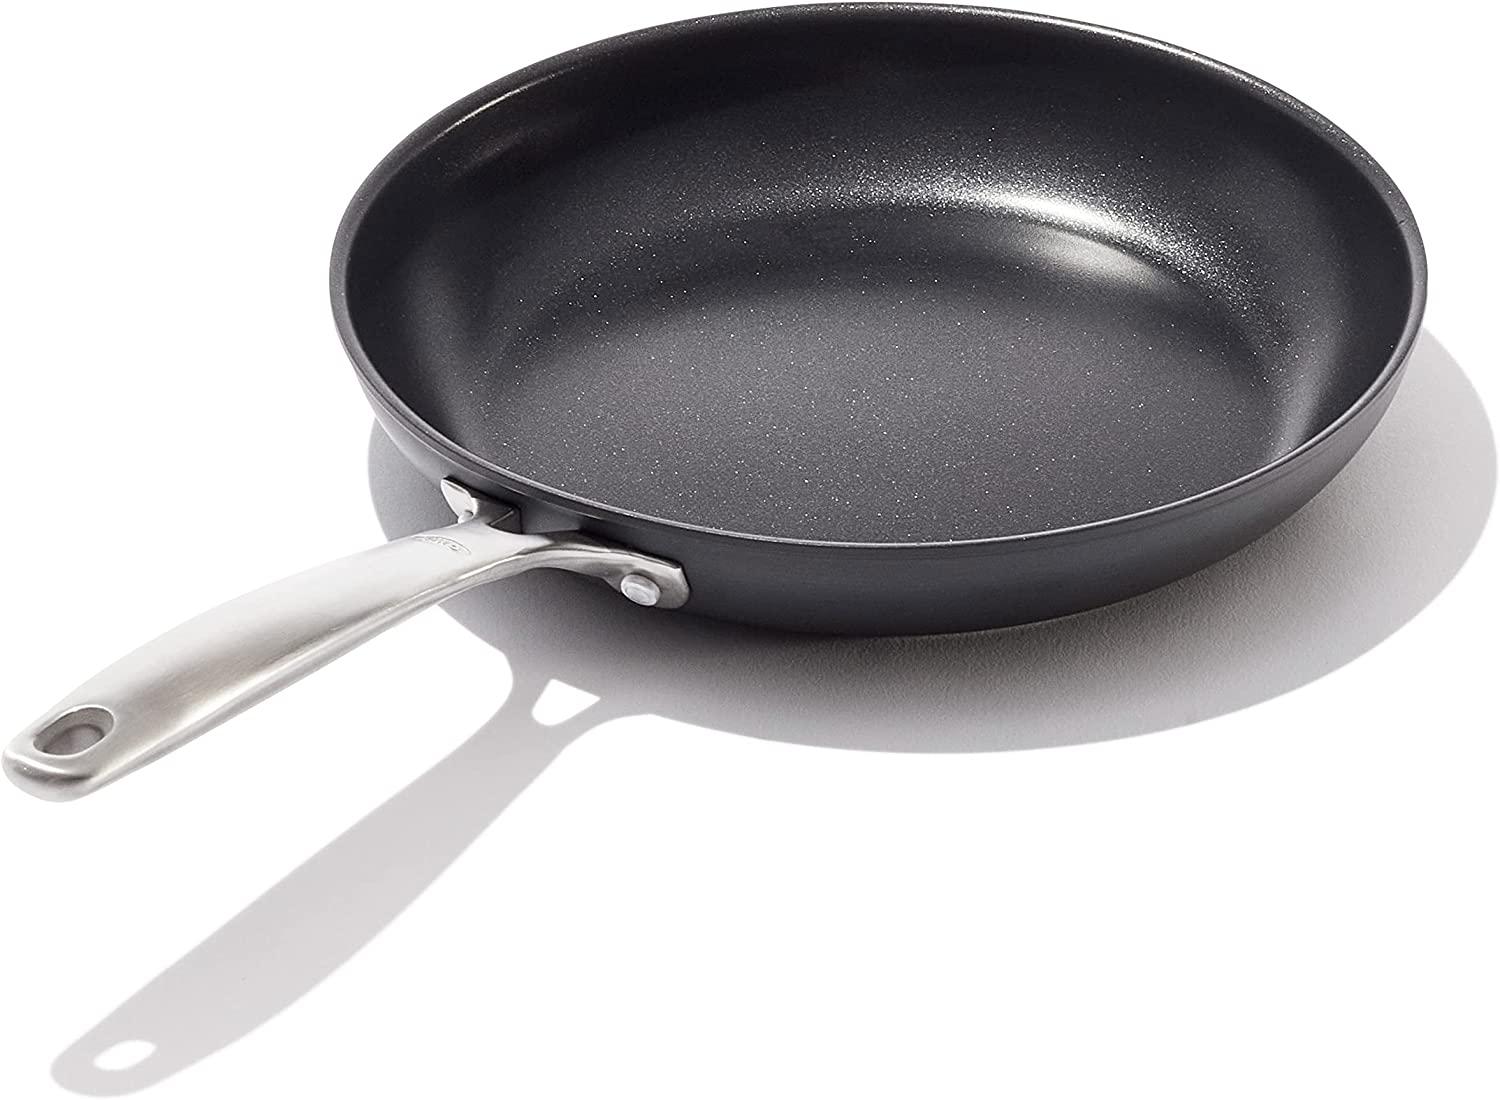 10in Good Grips Pro Nonstick Frying Pan for $20.46 Shipped